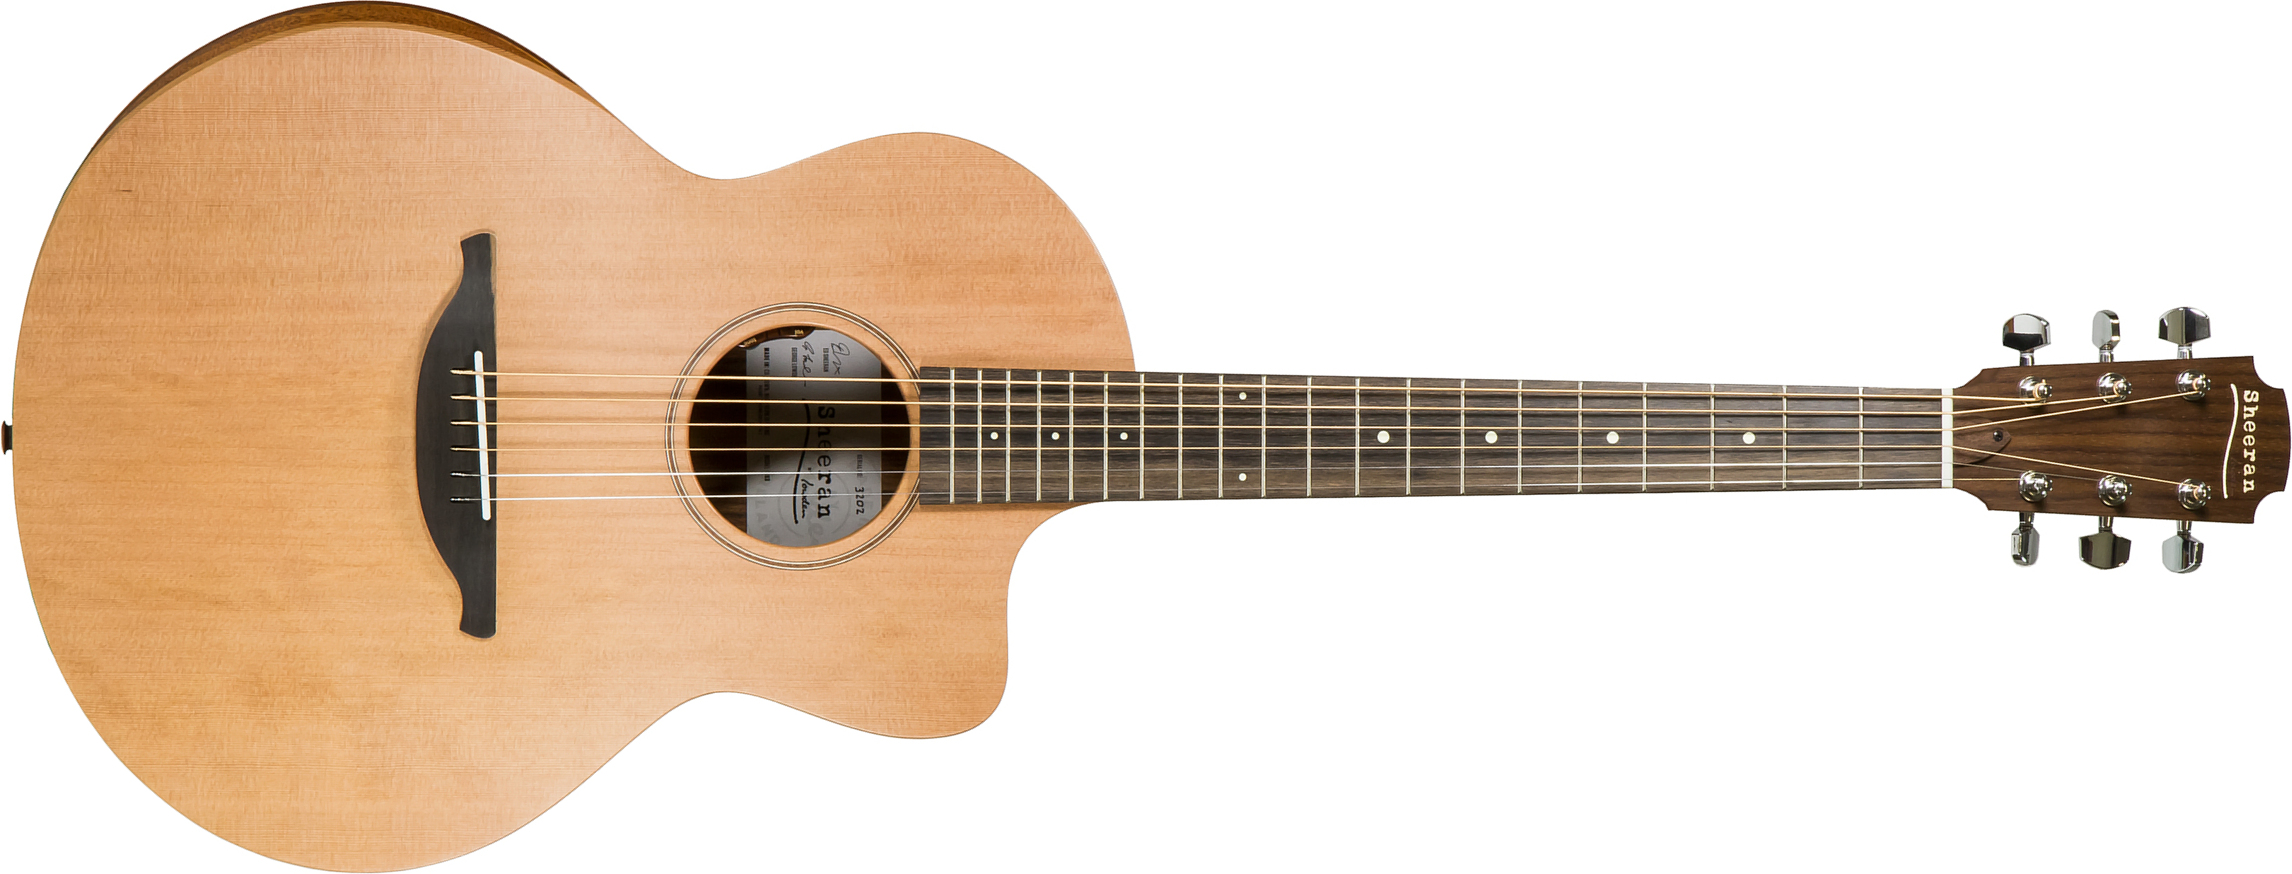 Sheeran By Lowden S03 Orchestra Model Cedre Palissandre Eb +housse - Natural Satin - Acoustic guitar & electro - Main picture